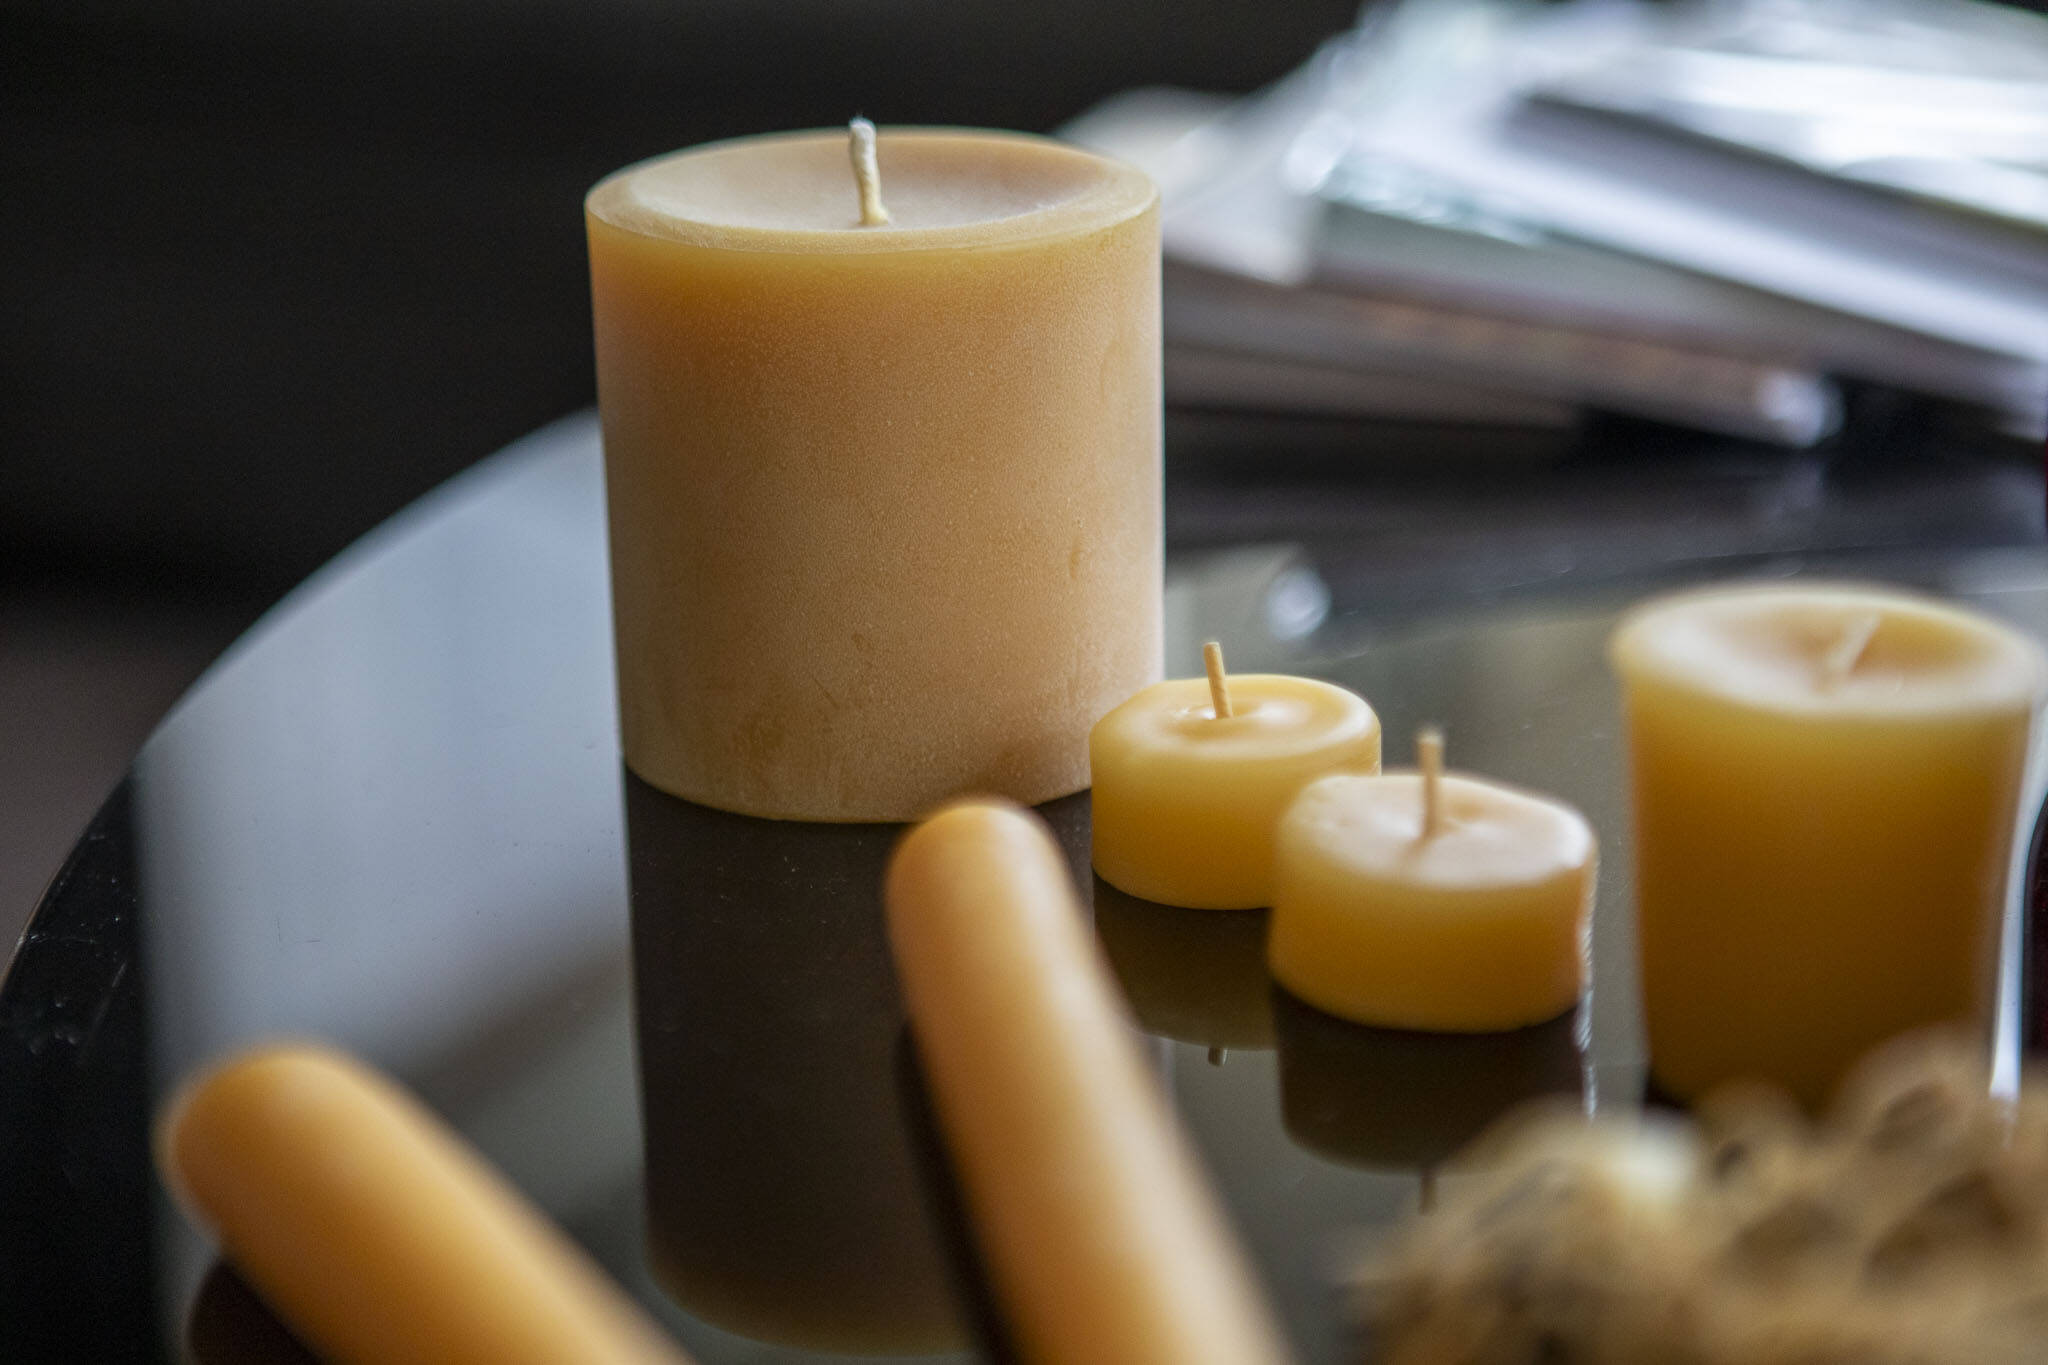 Candle factory employees told they'd be fired if they left work early:  report